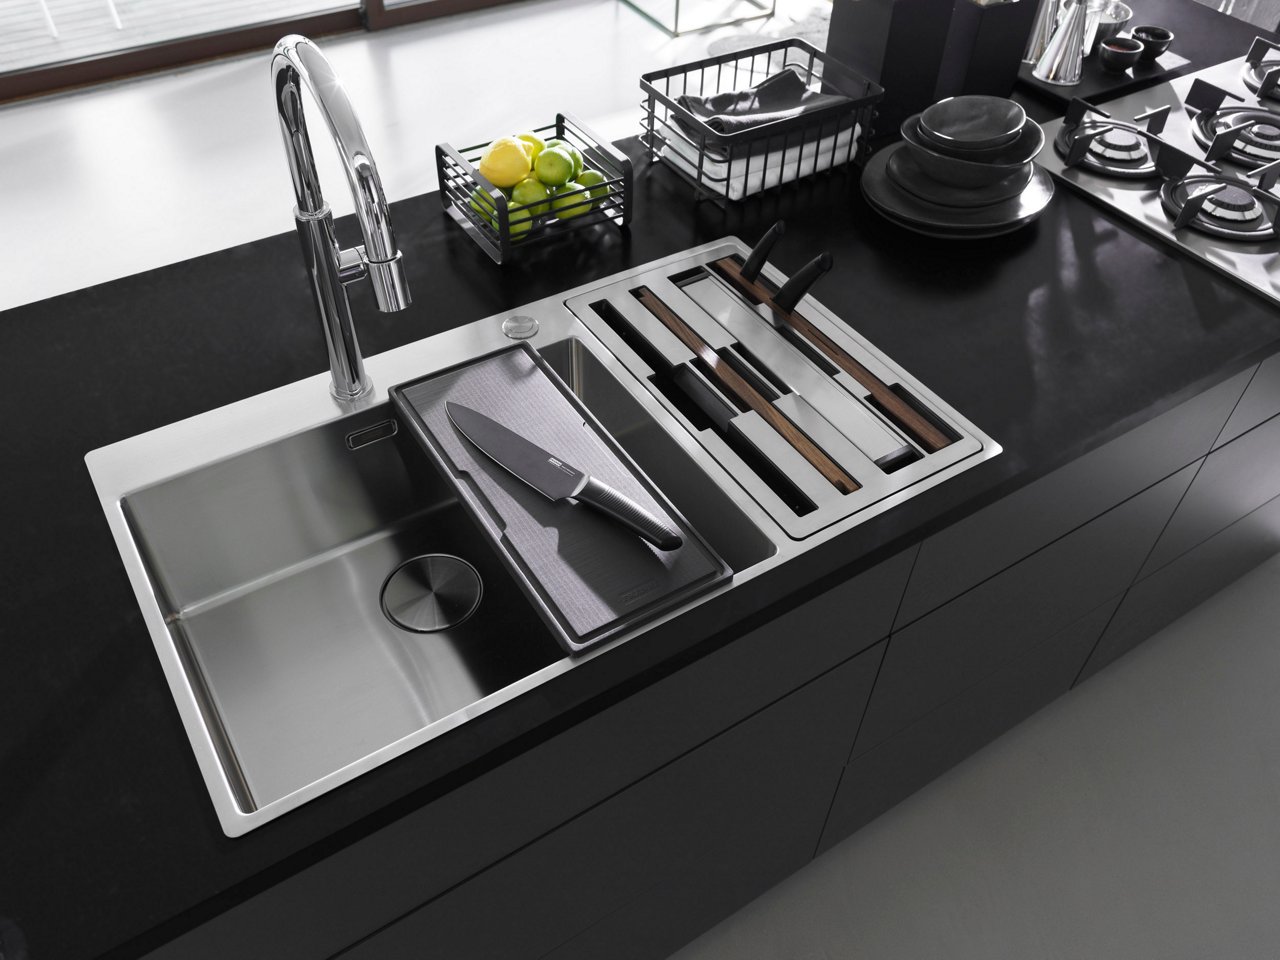 Sink with built-in appliances